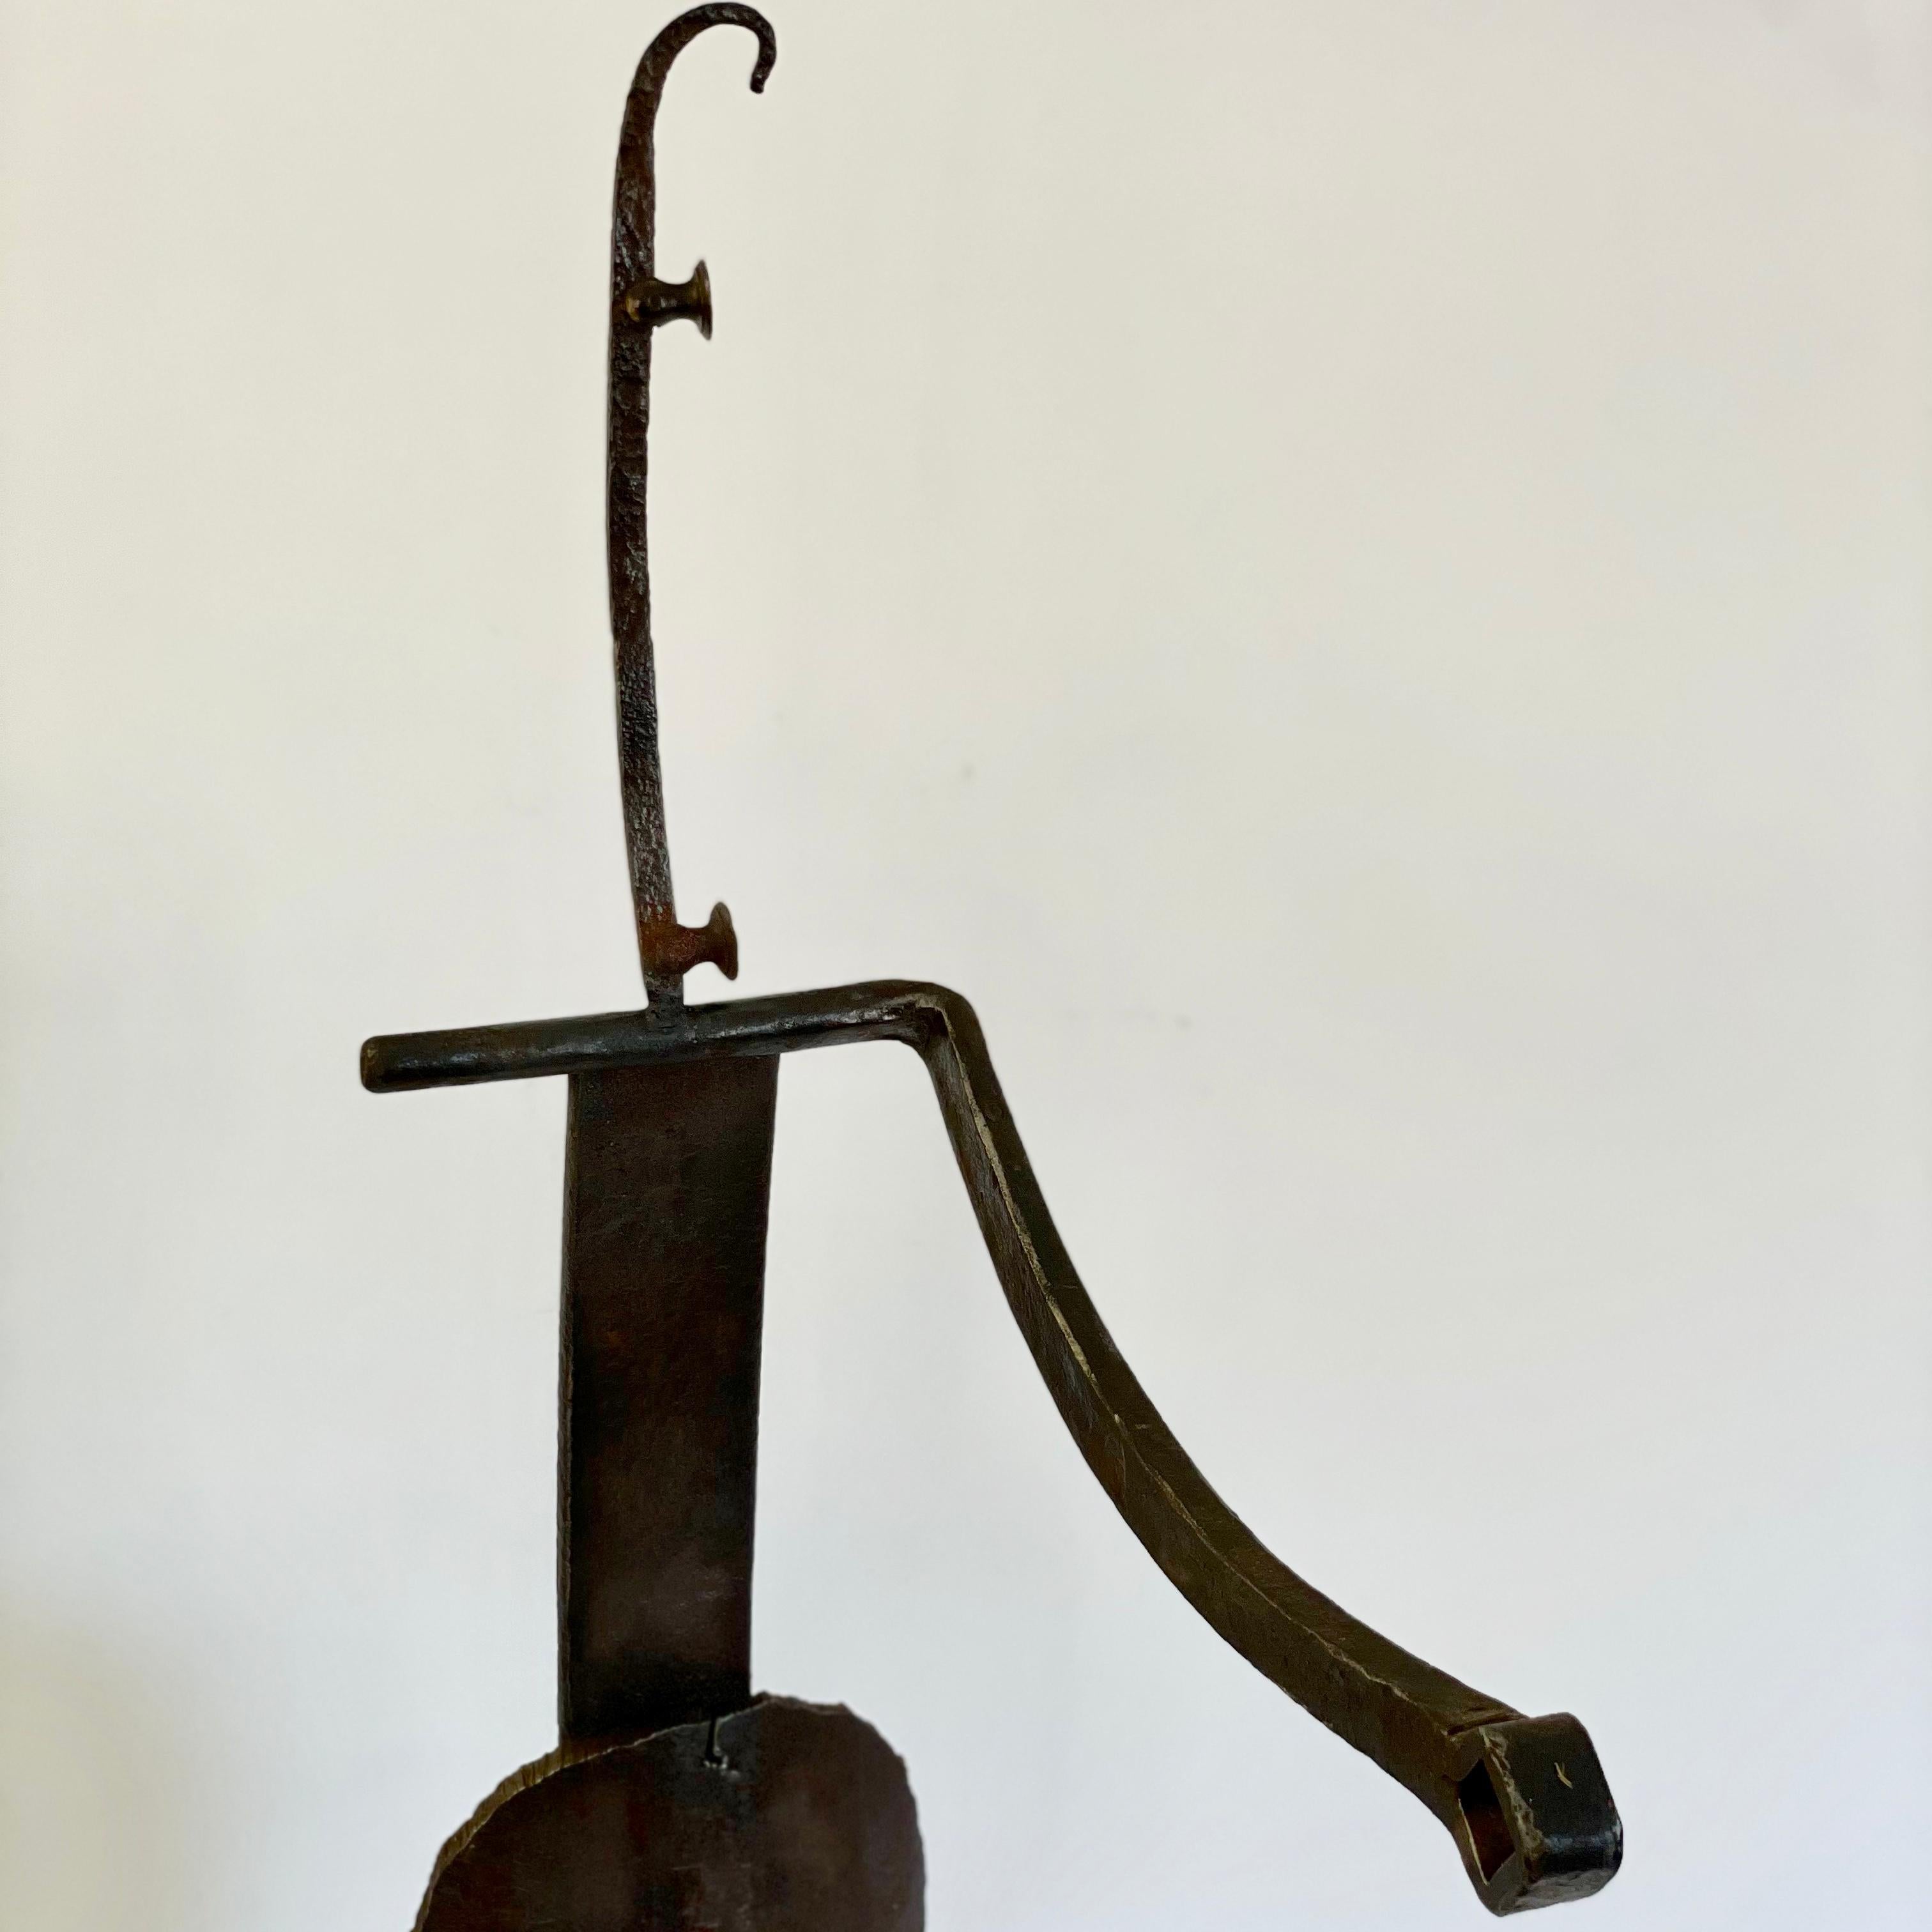 Venus
welded steel
Measures: 12-1/2 x 17-1/2-37 in.

Artist statement:

I seldom use stock material, but prefer distressed and rusted steel that has been scarred, bent, and made imperfect. In this state, the material becomes quite beautiful.